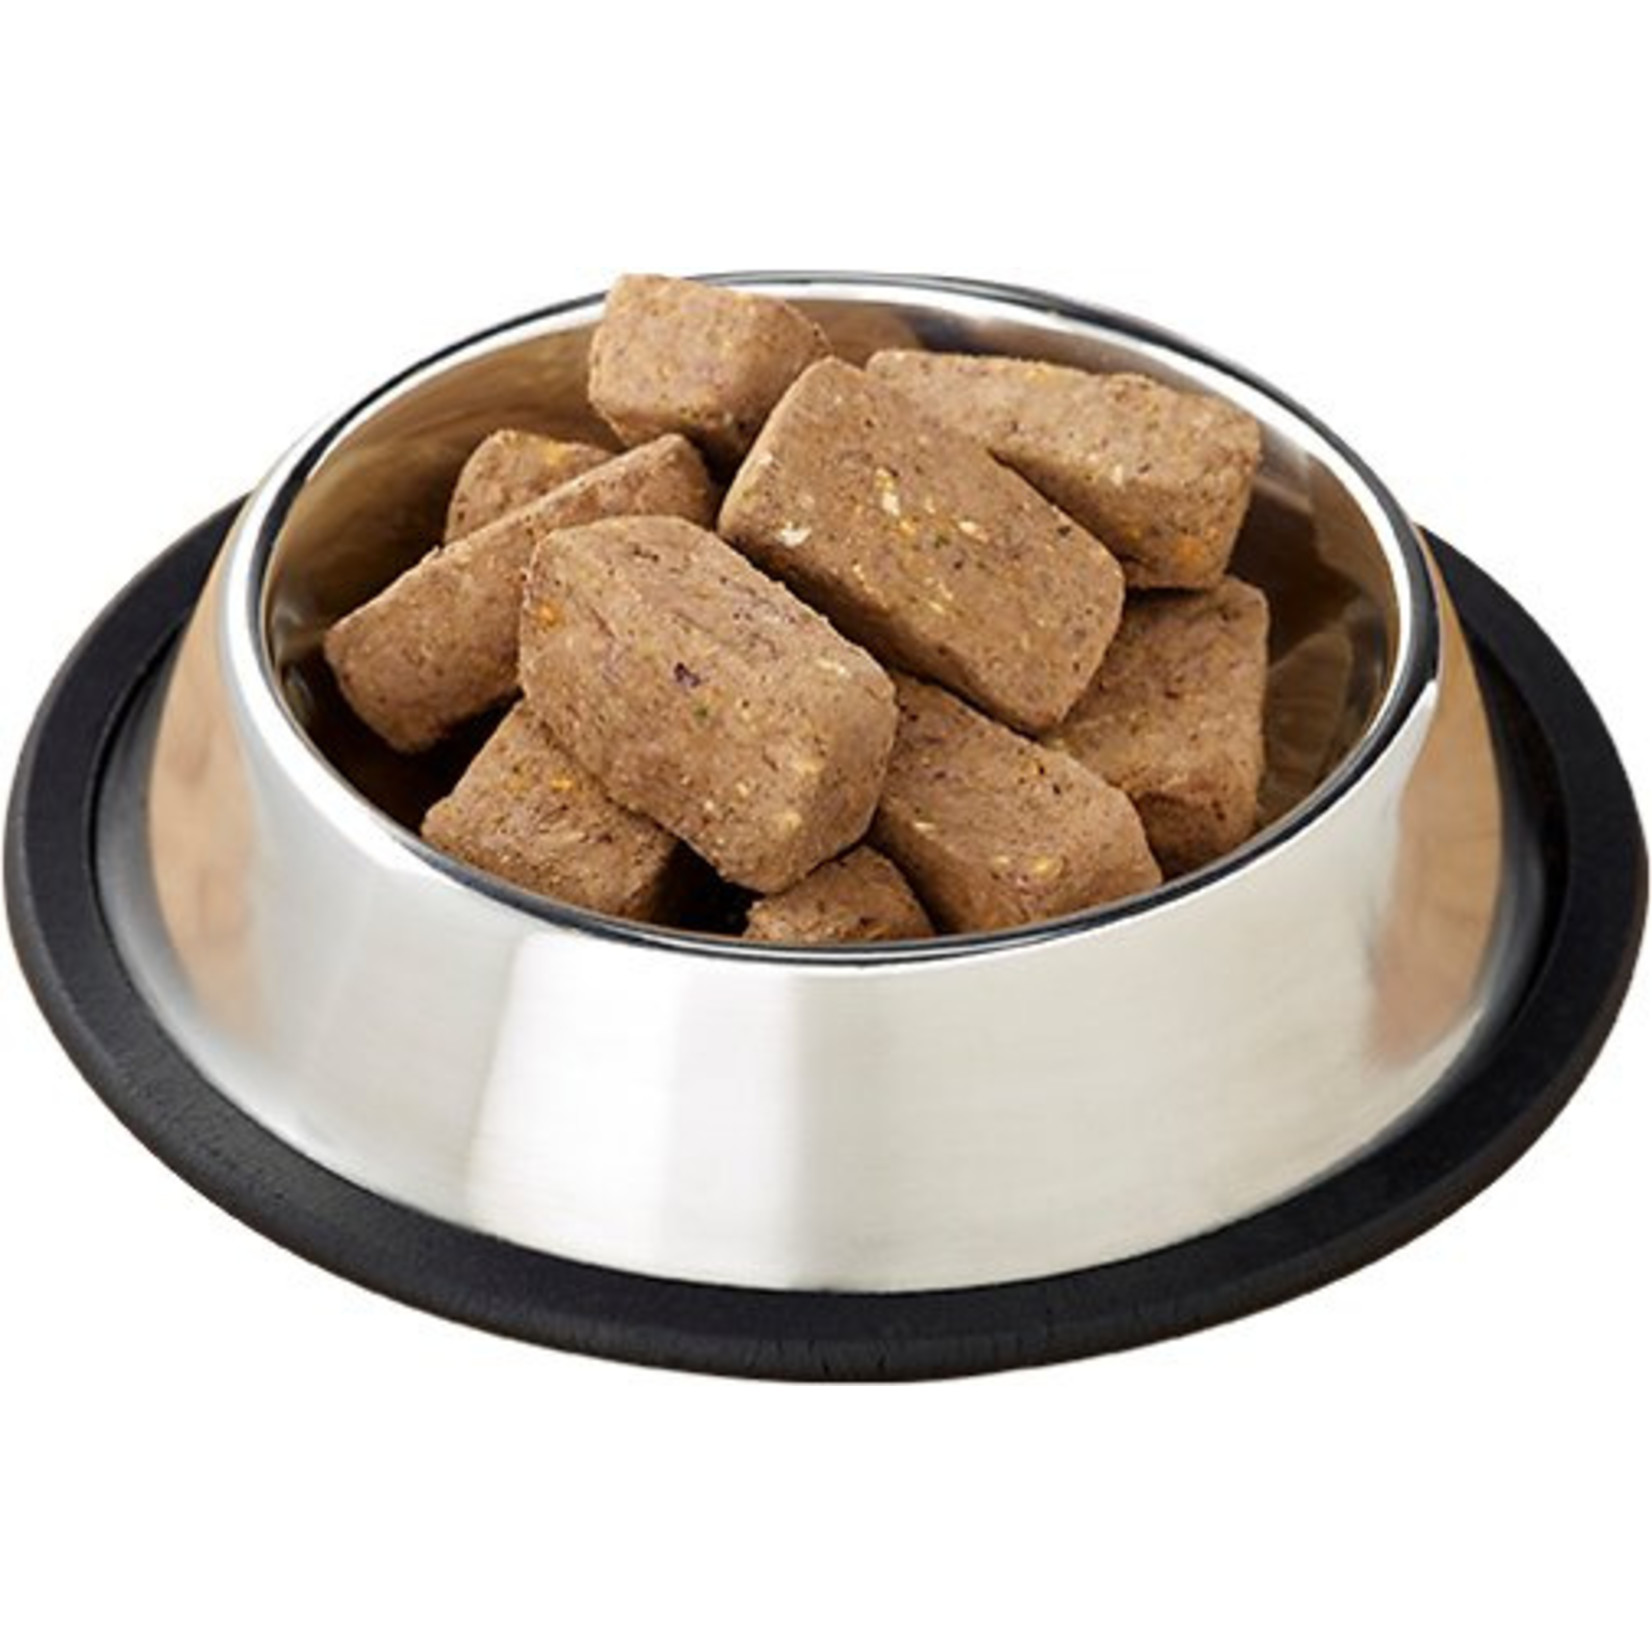 Primal Pet Foods Primal Freeze-Dried Nuggets - Chicken & Salmon Formula for Cats